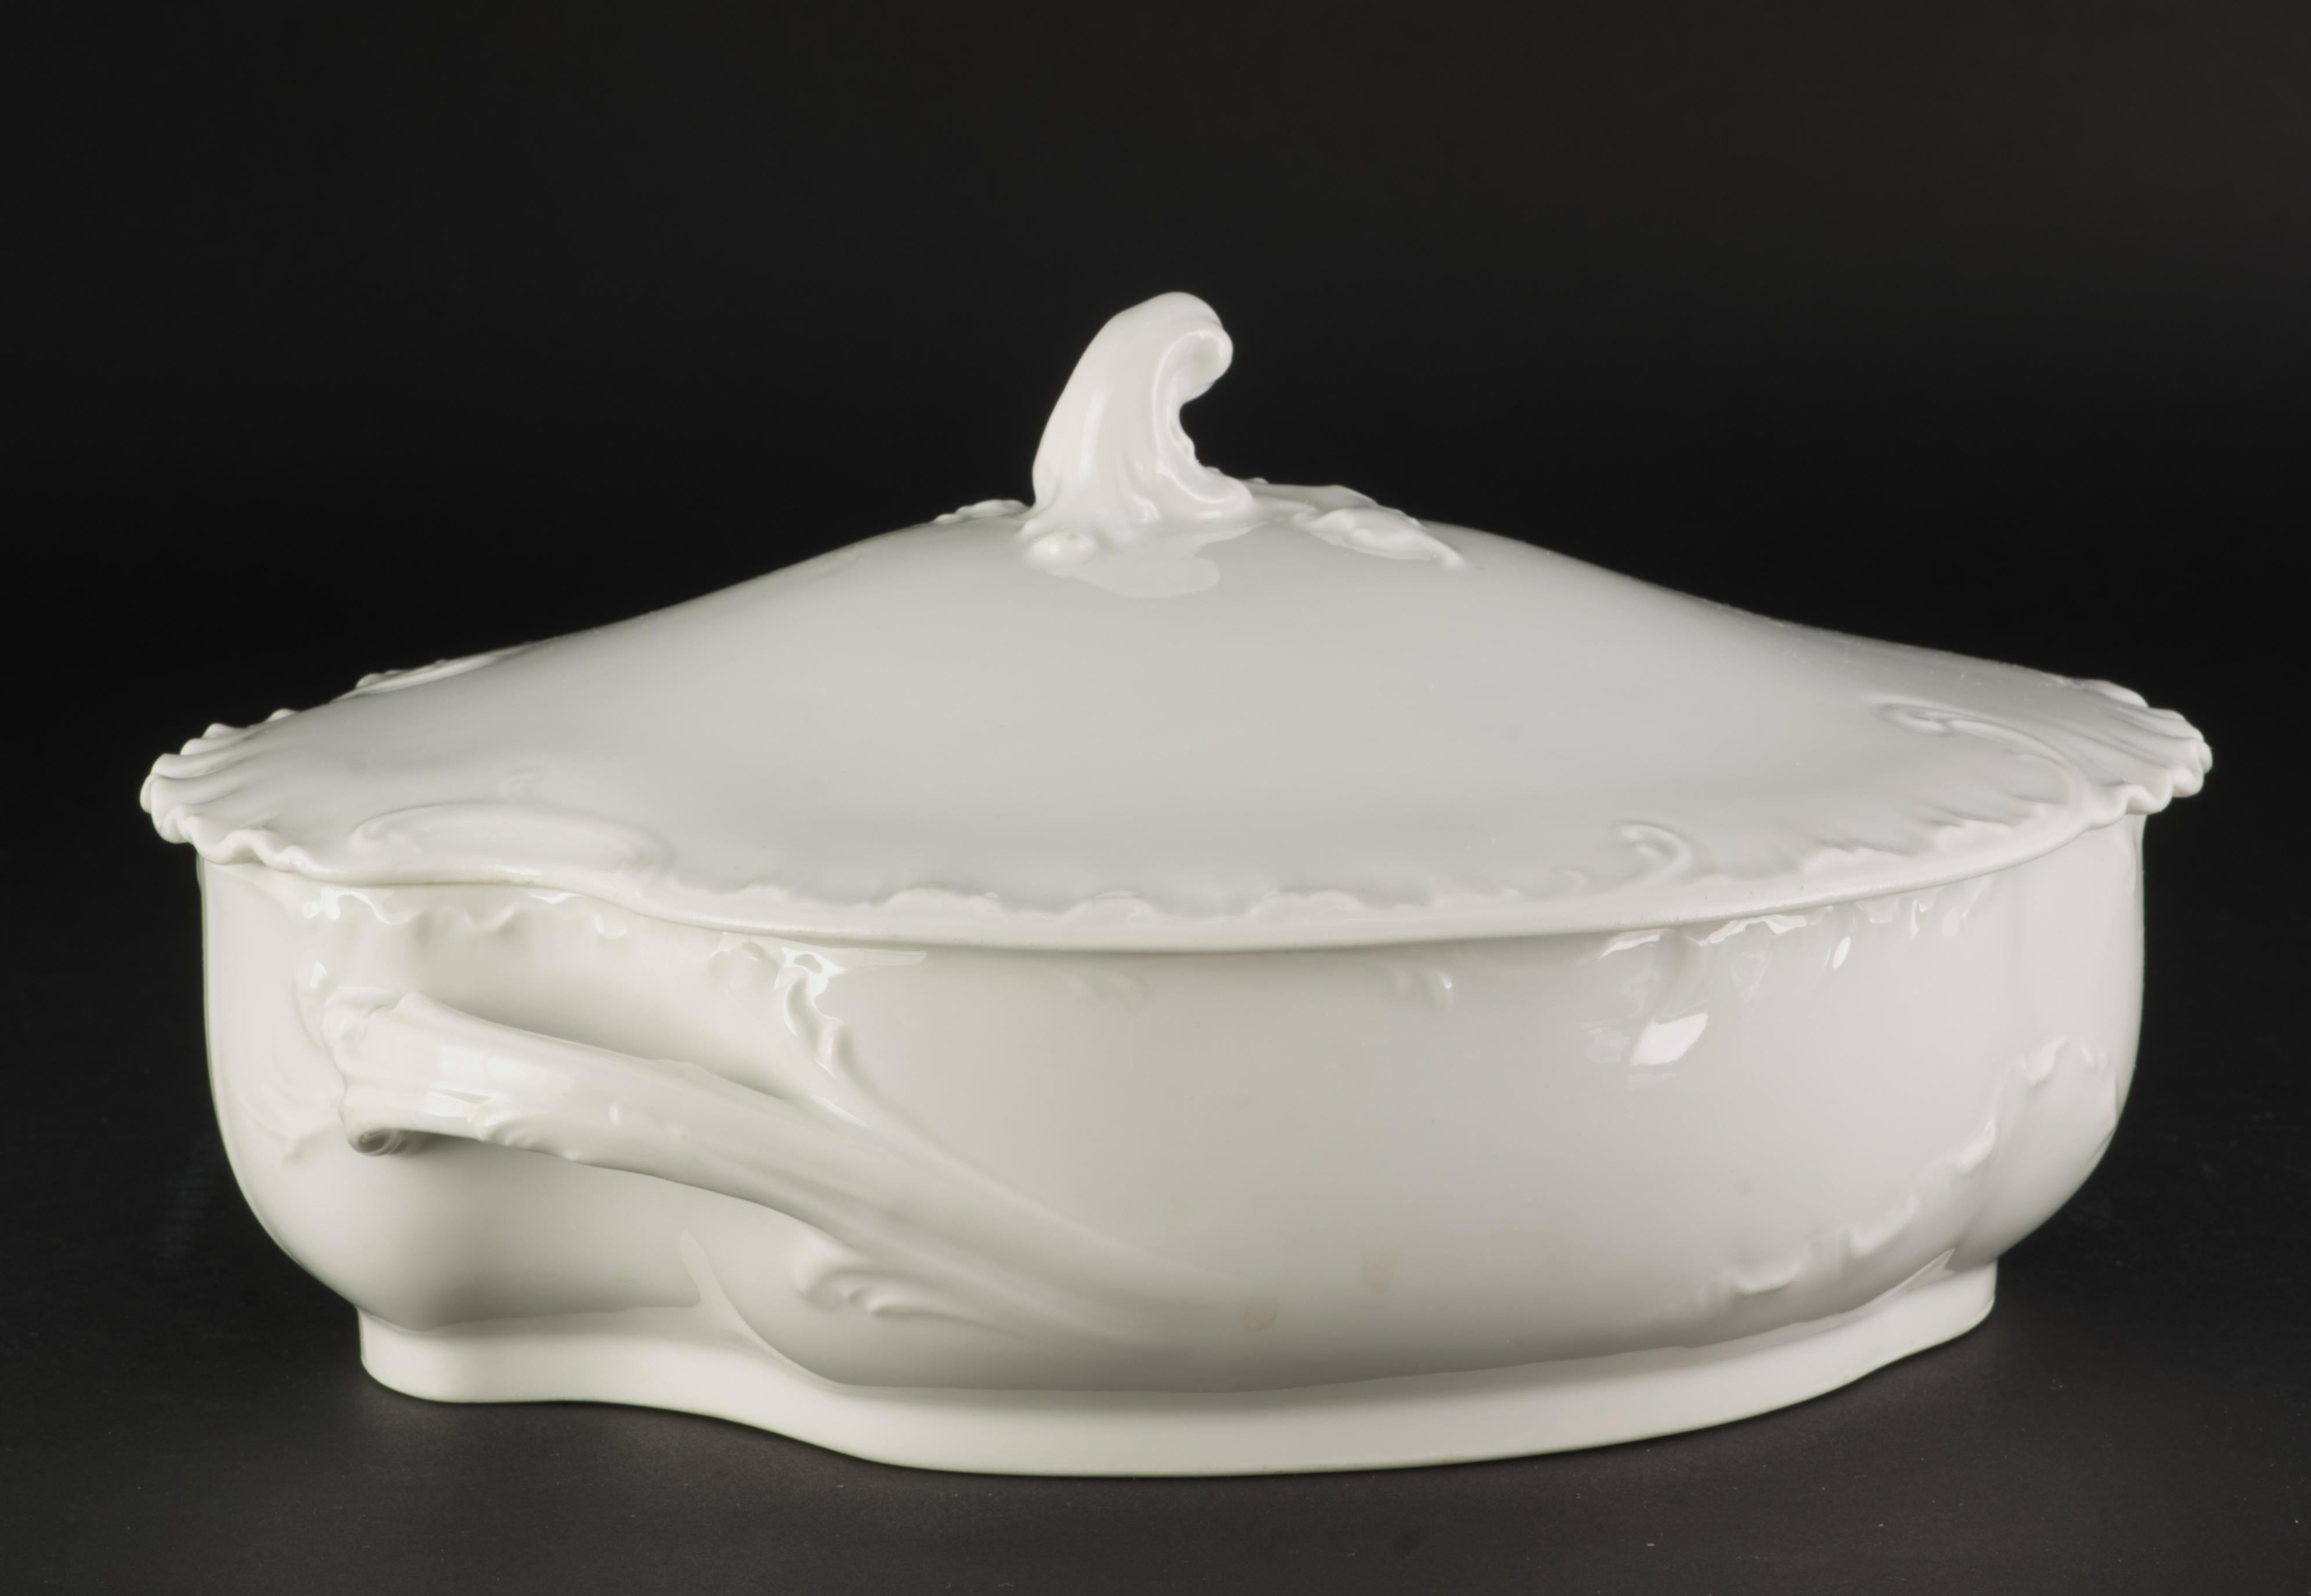 Haviland Limoges Oval Bowl with Cover is in Marseille (or Schleiger 9) shape; it is all white in color. The bowl has complicated asymmetrical shape with elaborate textured decor on both bowl and cover and scalloped double rim on the cover. The bowl